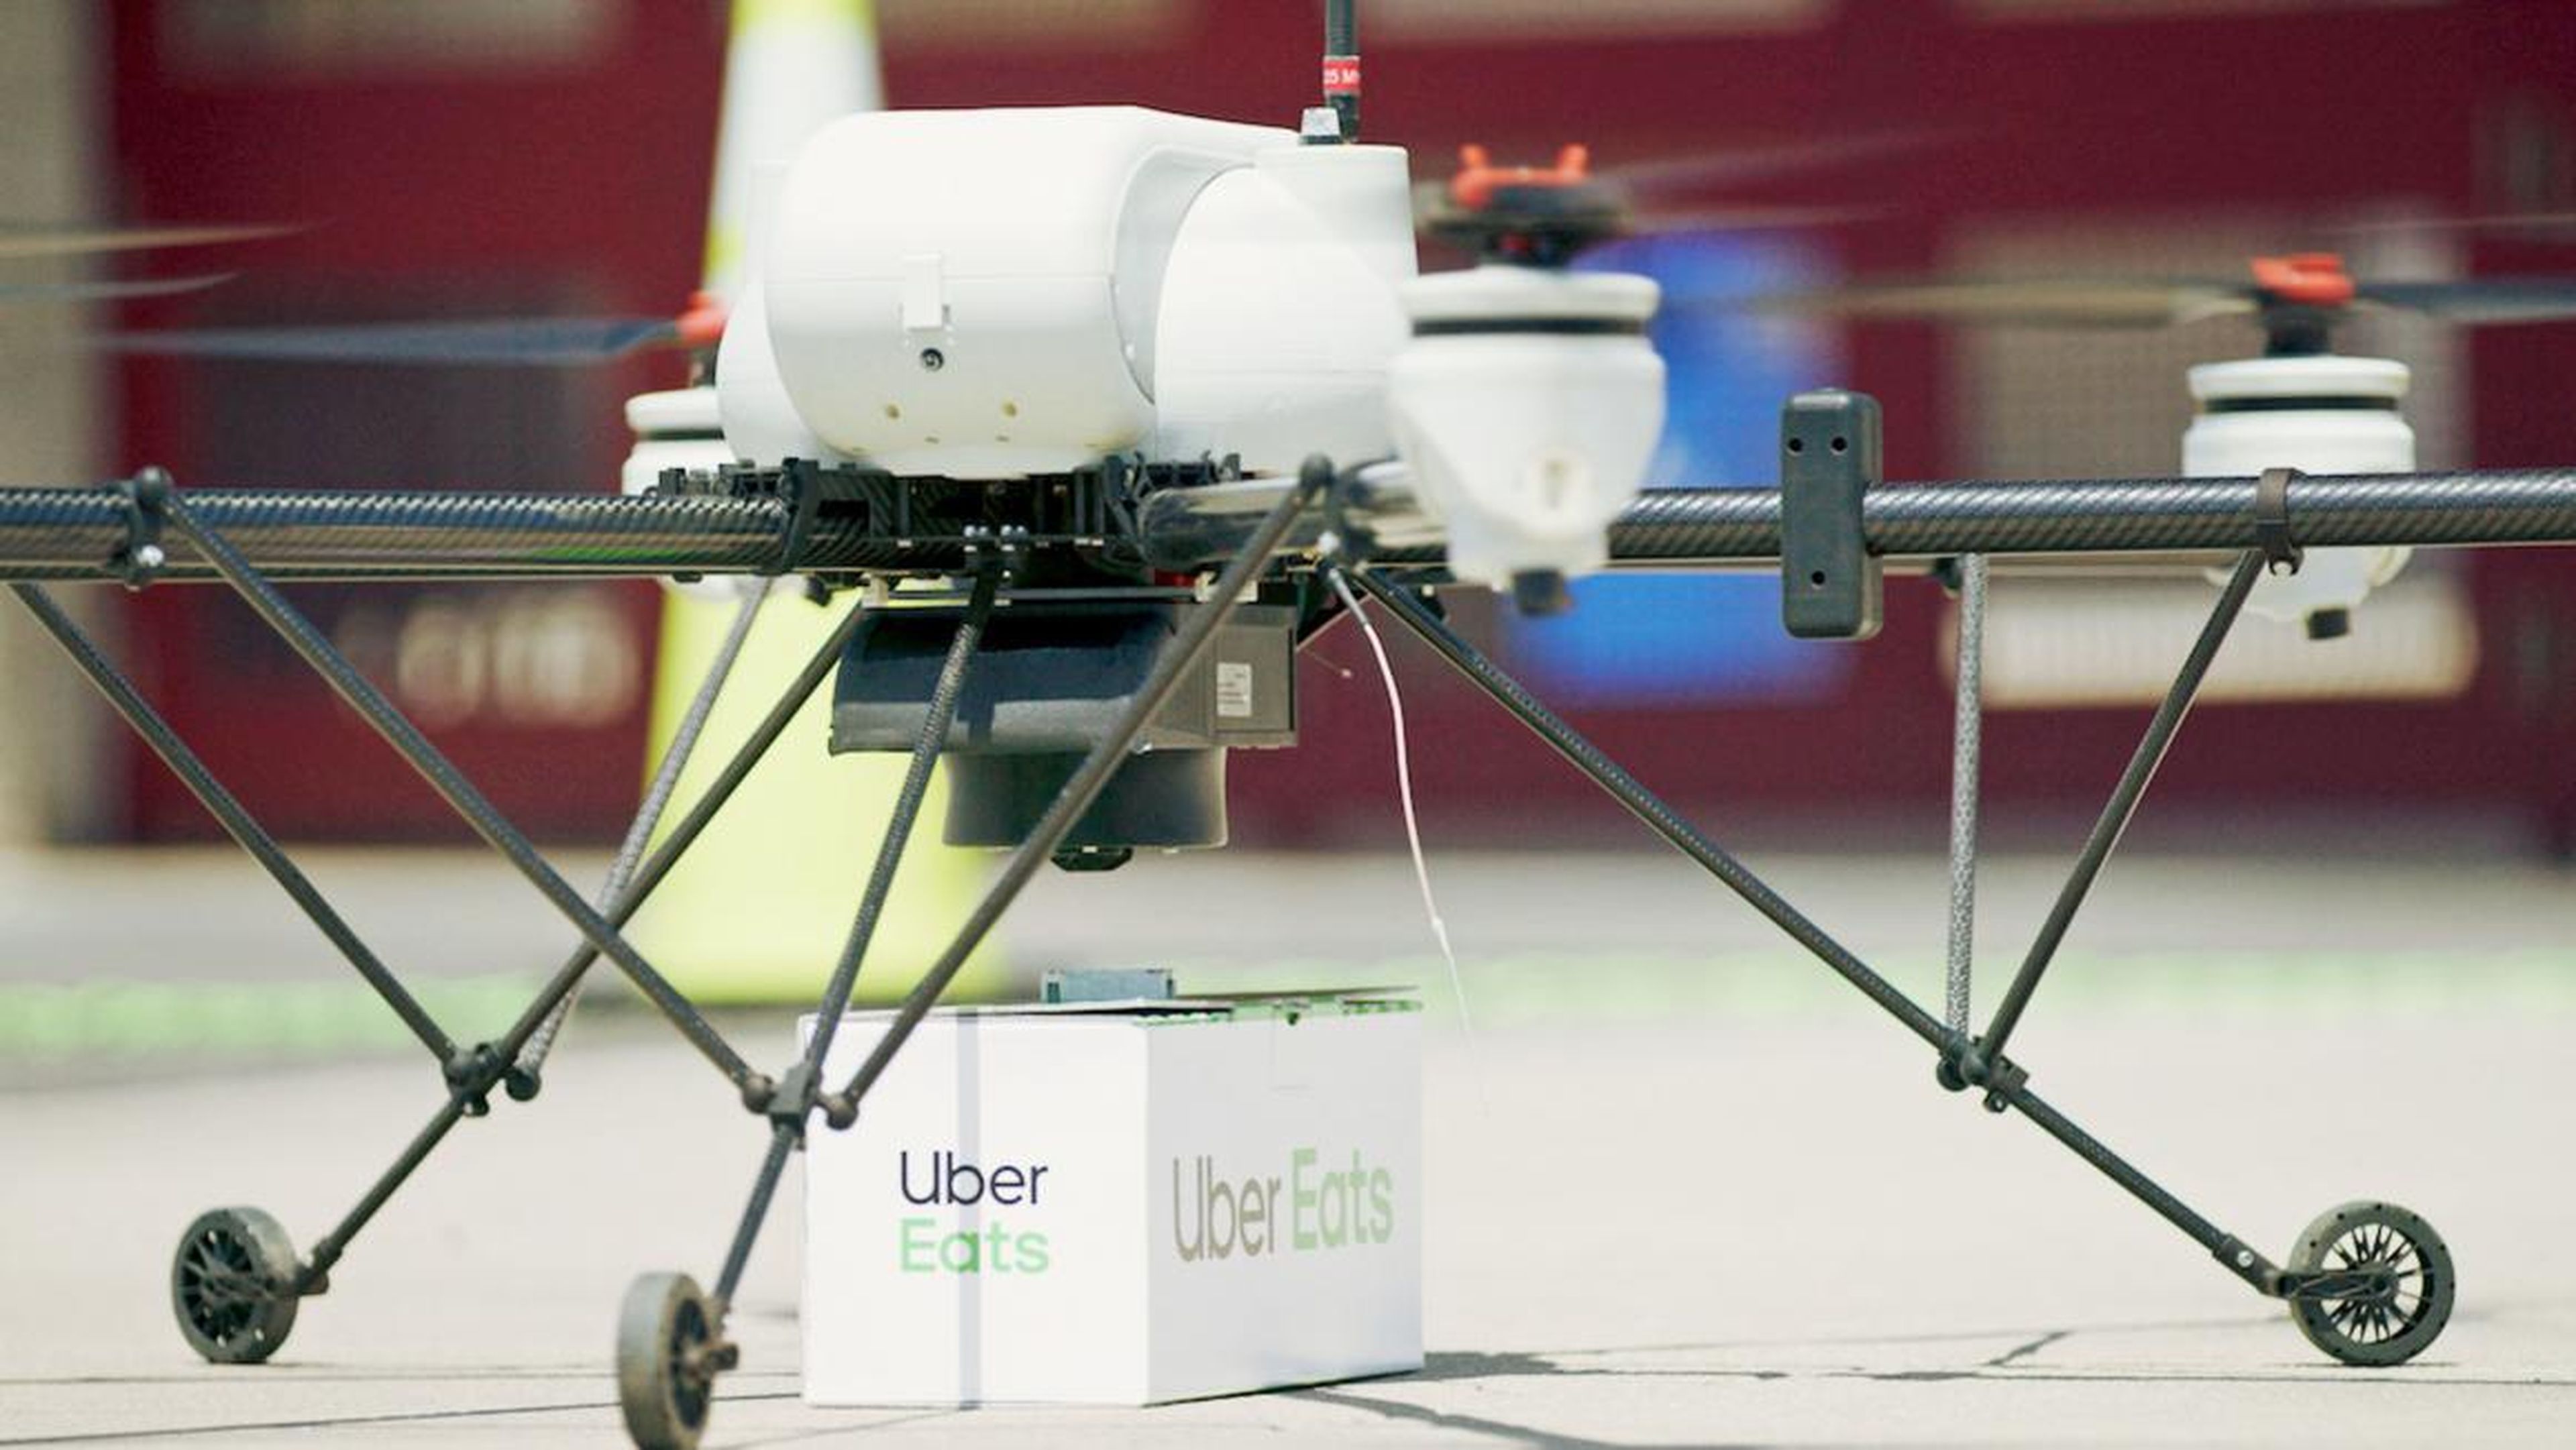 Uber says it will deliver McDonald's meals via drones in San Diego as soon as this year